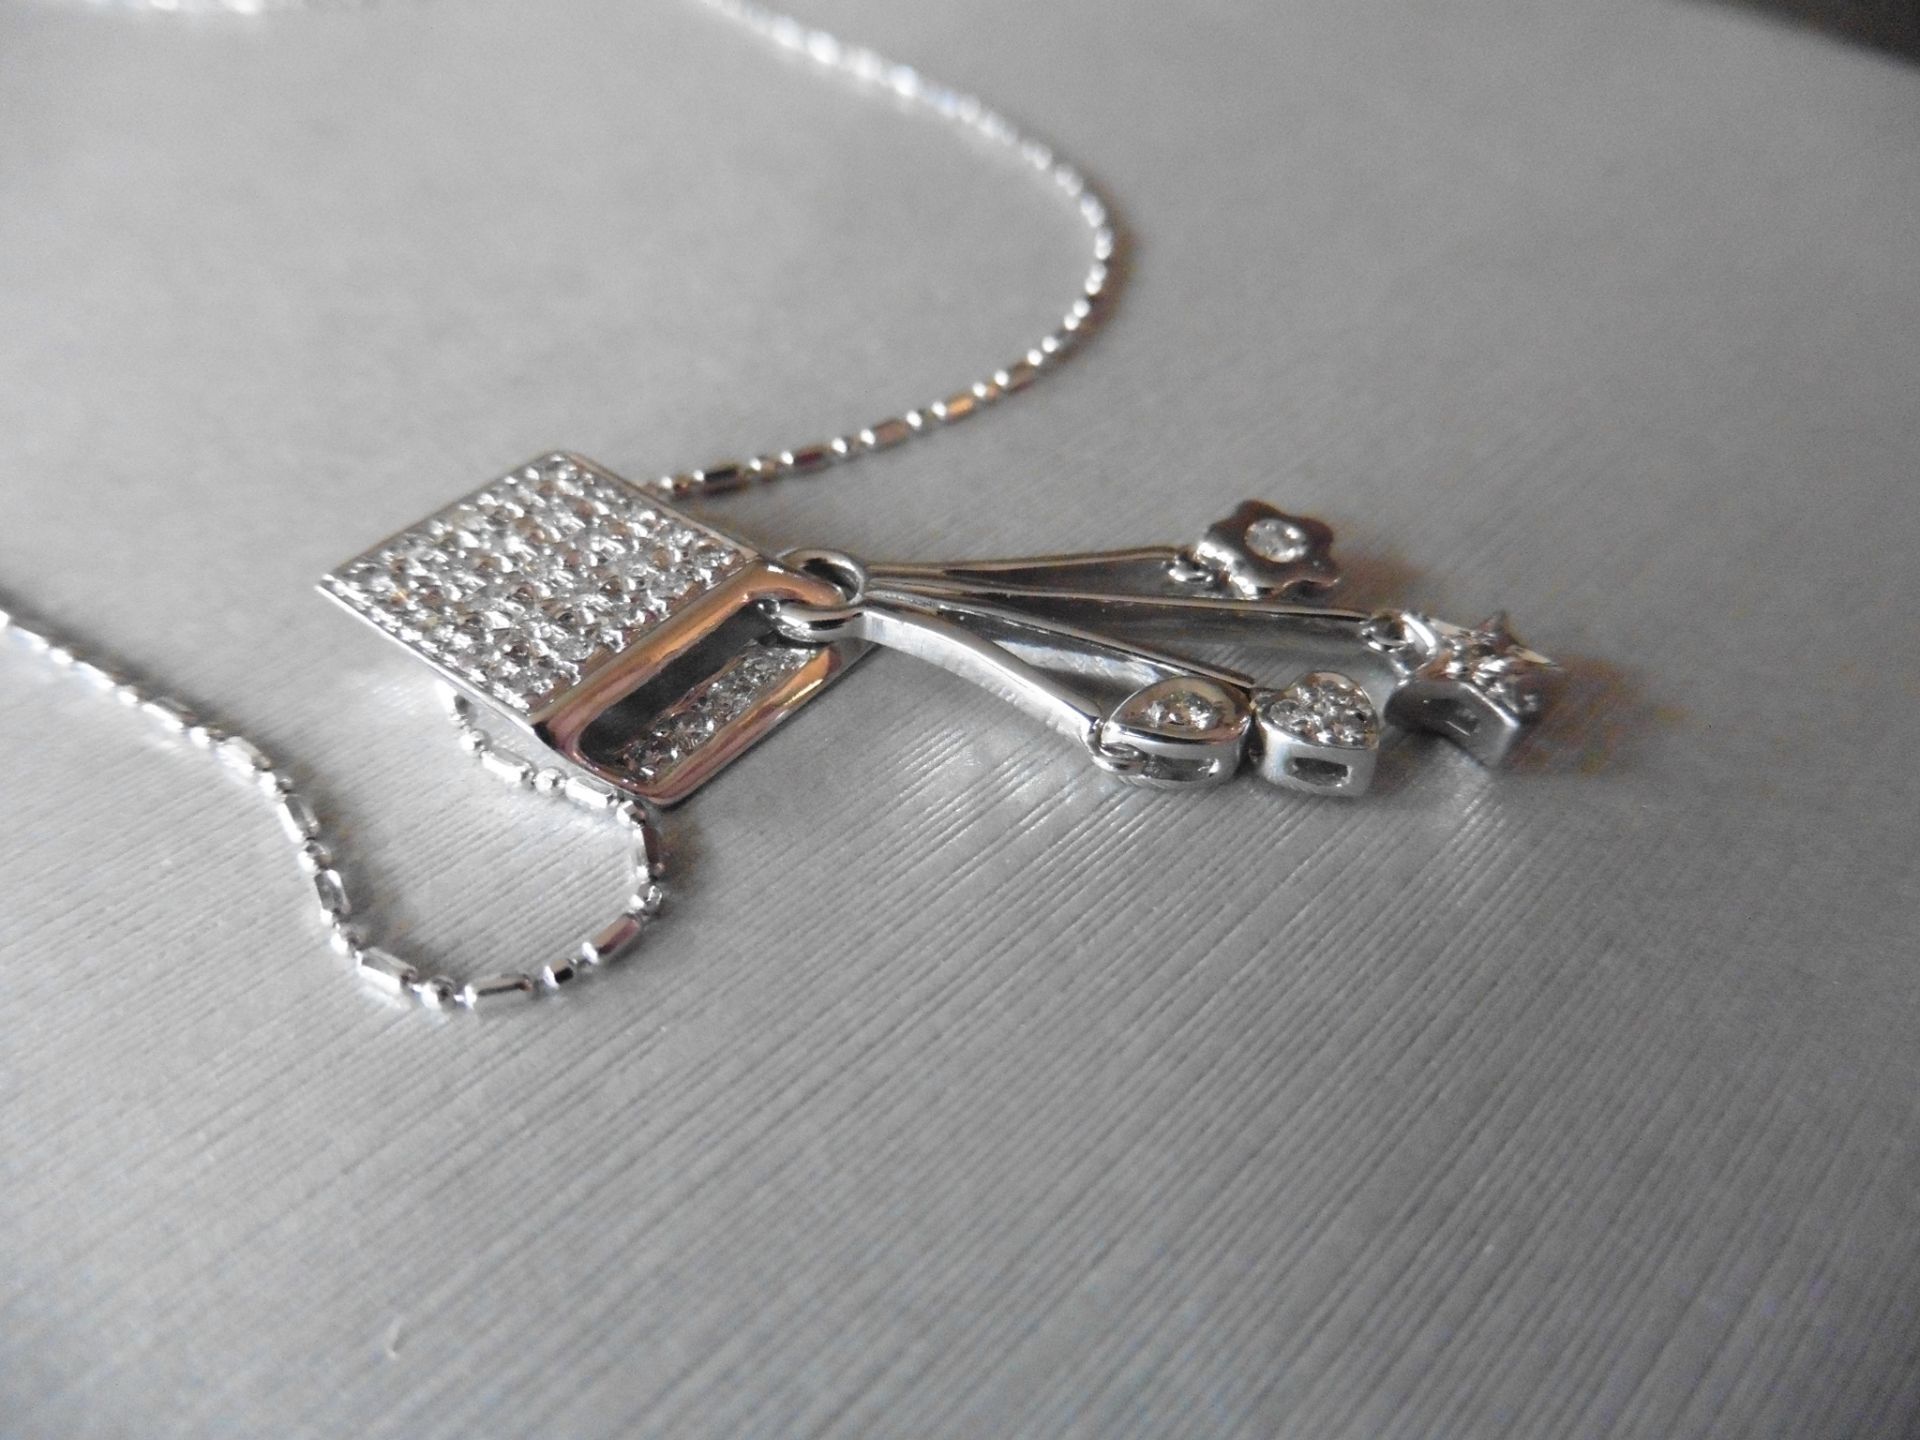 18ct white gold fancy drop pendant. Diamond shaped design at the top which is micro set with tiny - Image 3 of 5